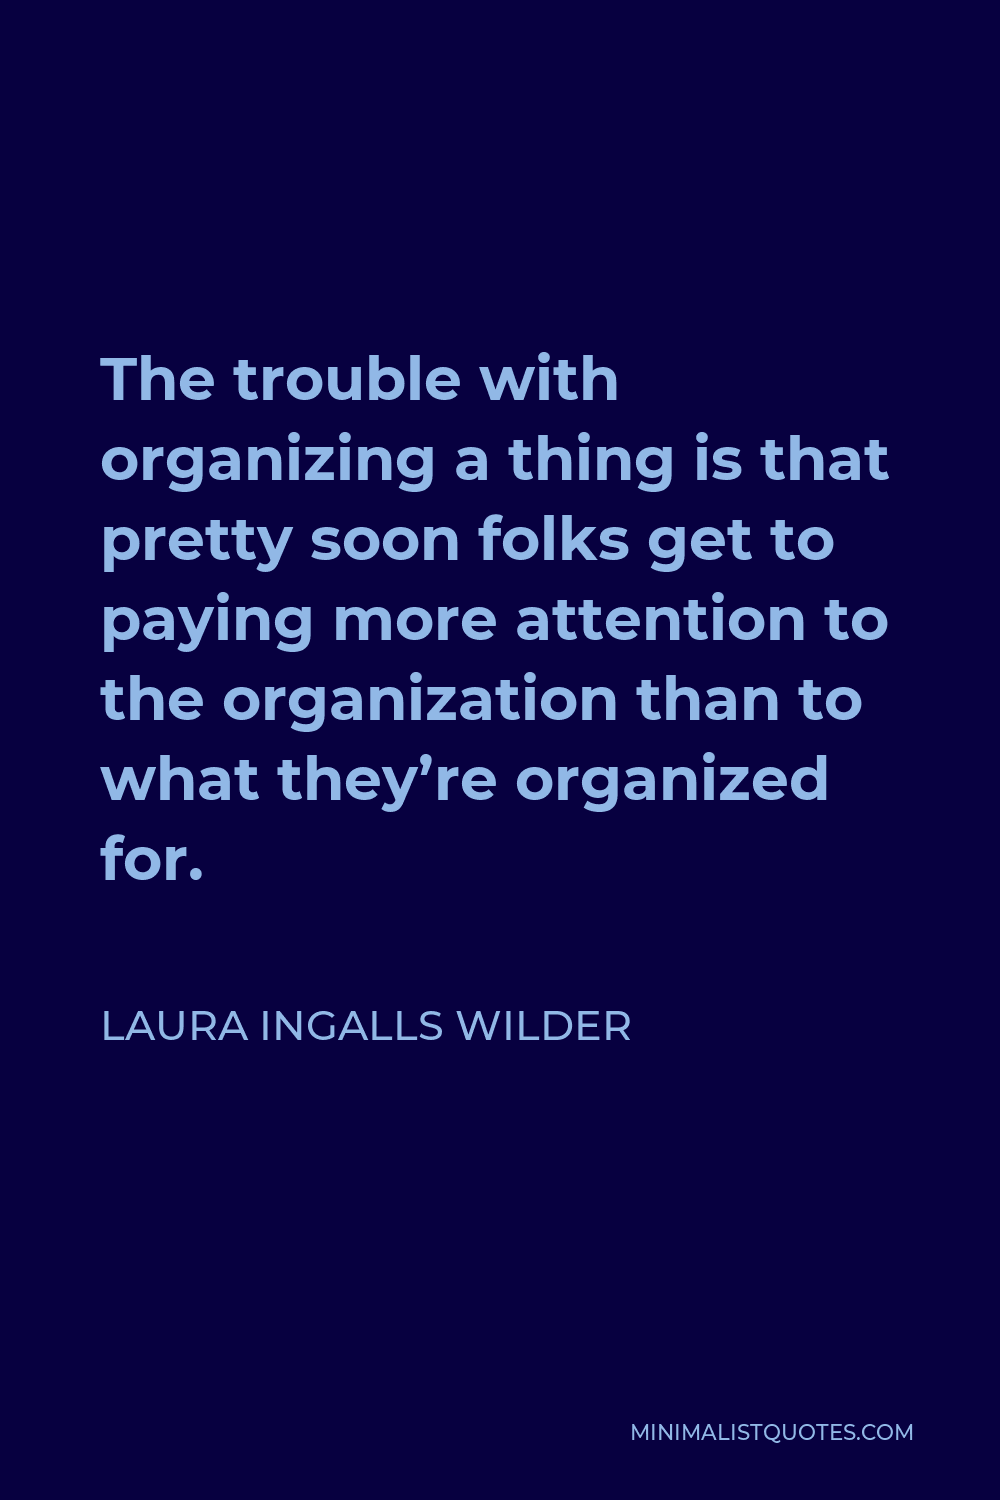 Laura Ingalls Wilder Quote - The trouble with organizing a thing is that pretty soon folks get to paying more attention to the organization than to what they’re organized for.